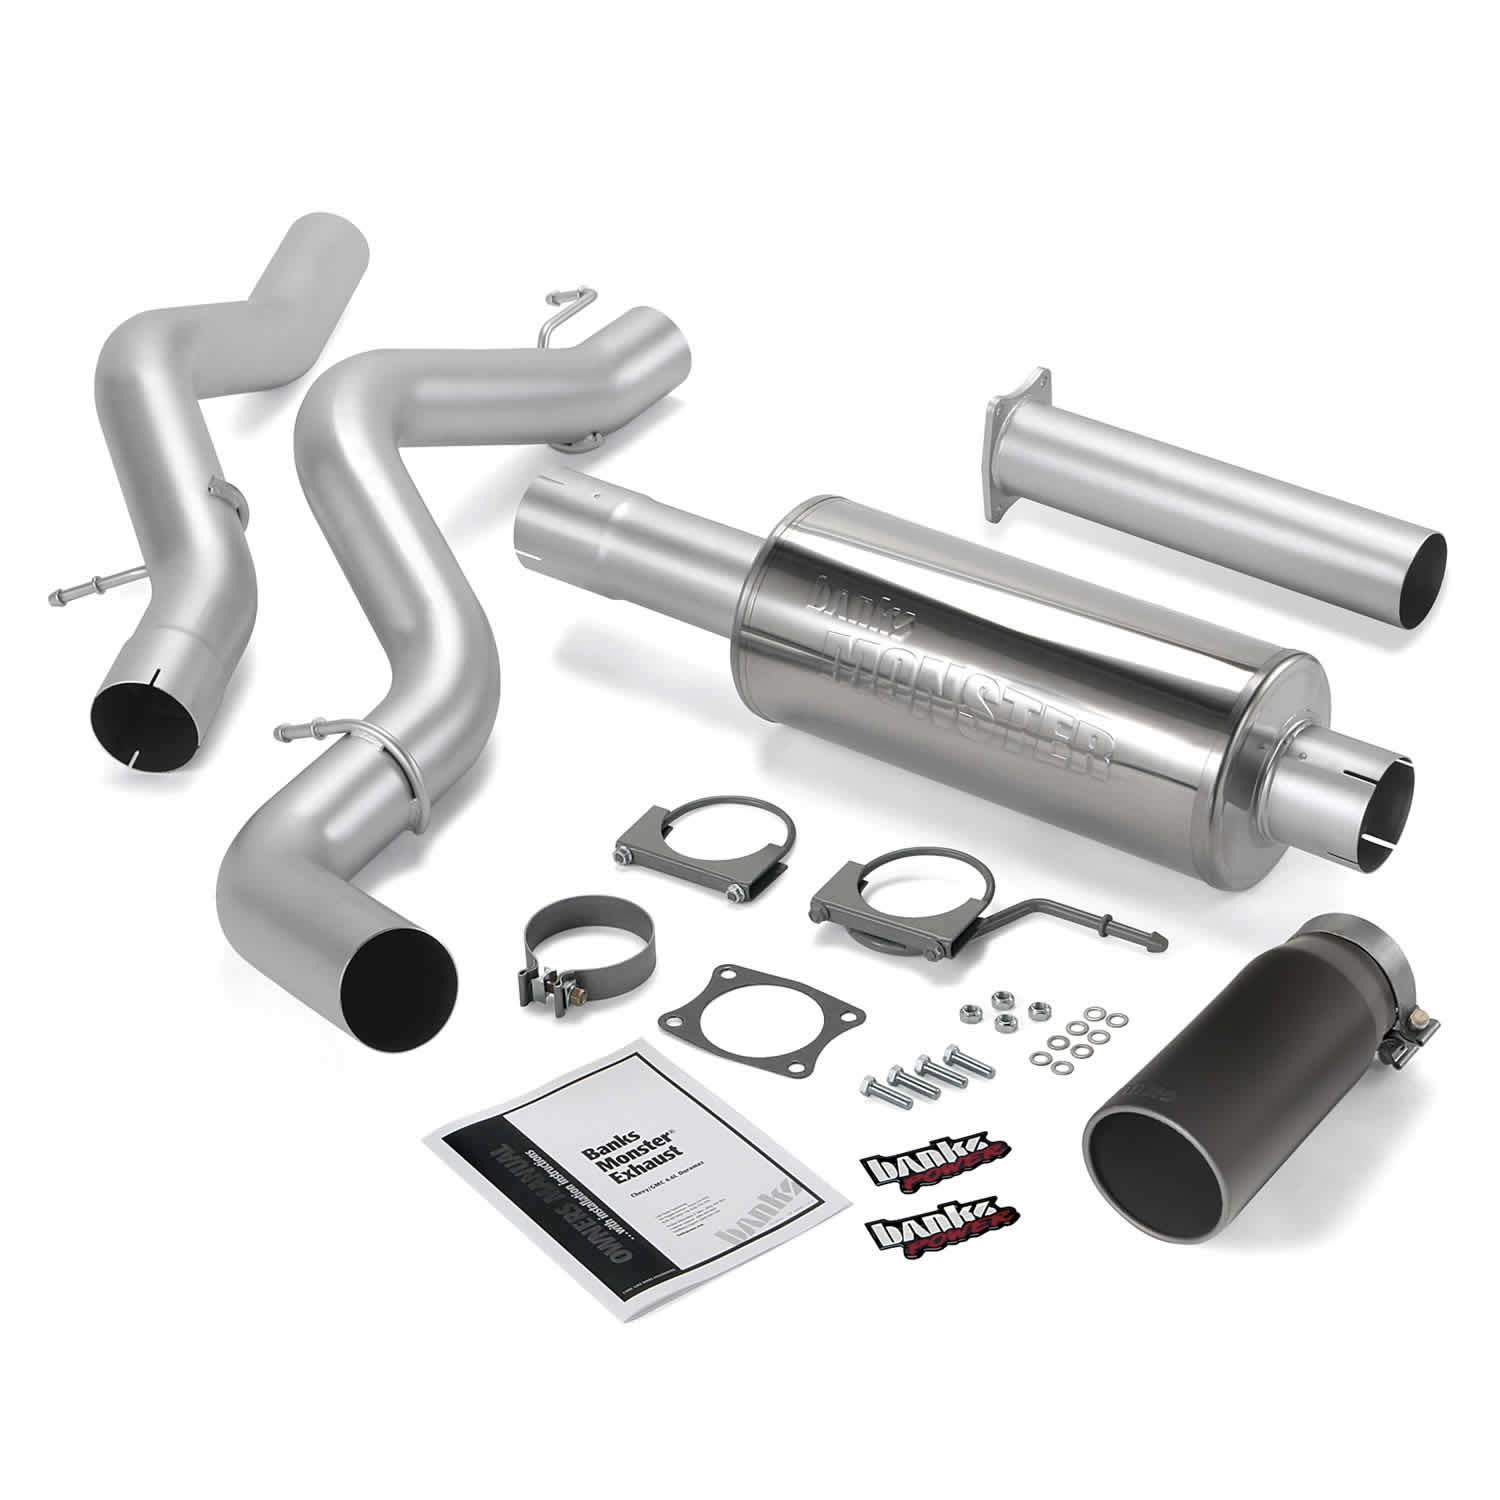 2002-2005 Duramax Exhaust System Kit - ECSB/CCSB (48633)-Exhaust System Kit-Banks Power-48633-B-Dirty Diesel Customs